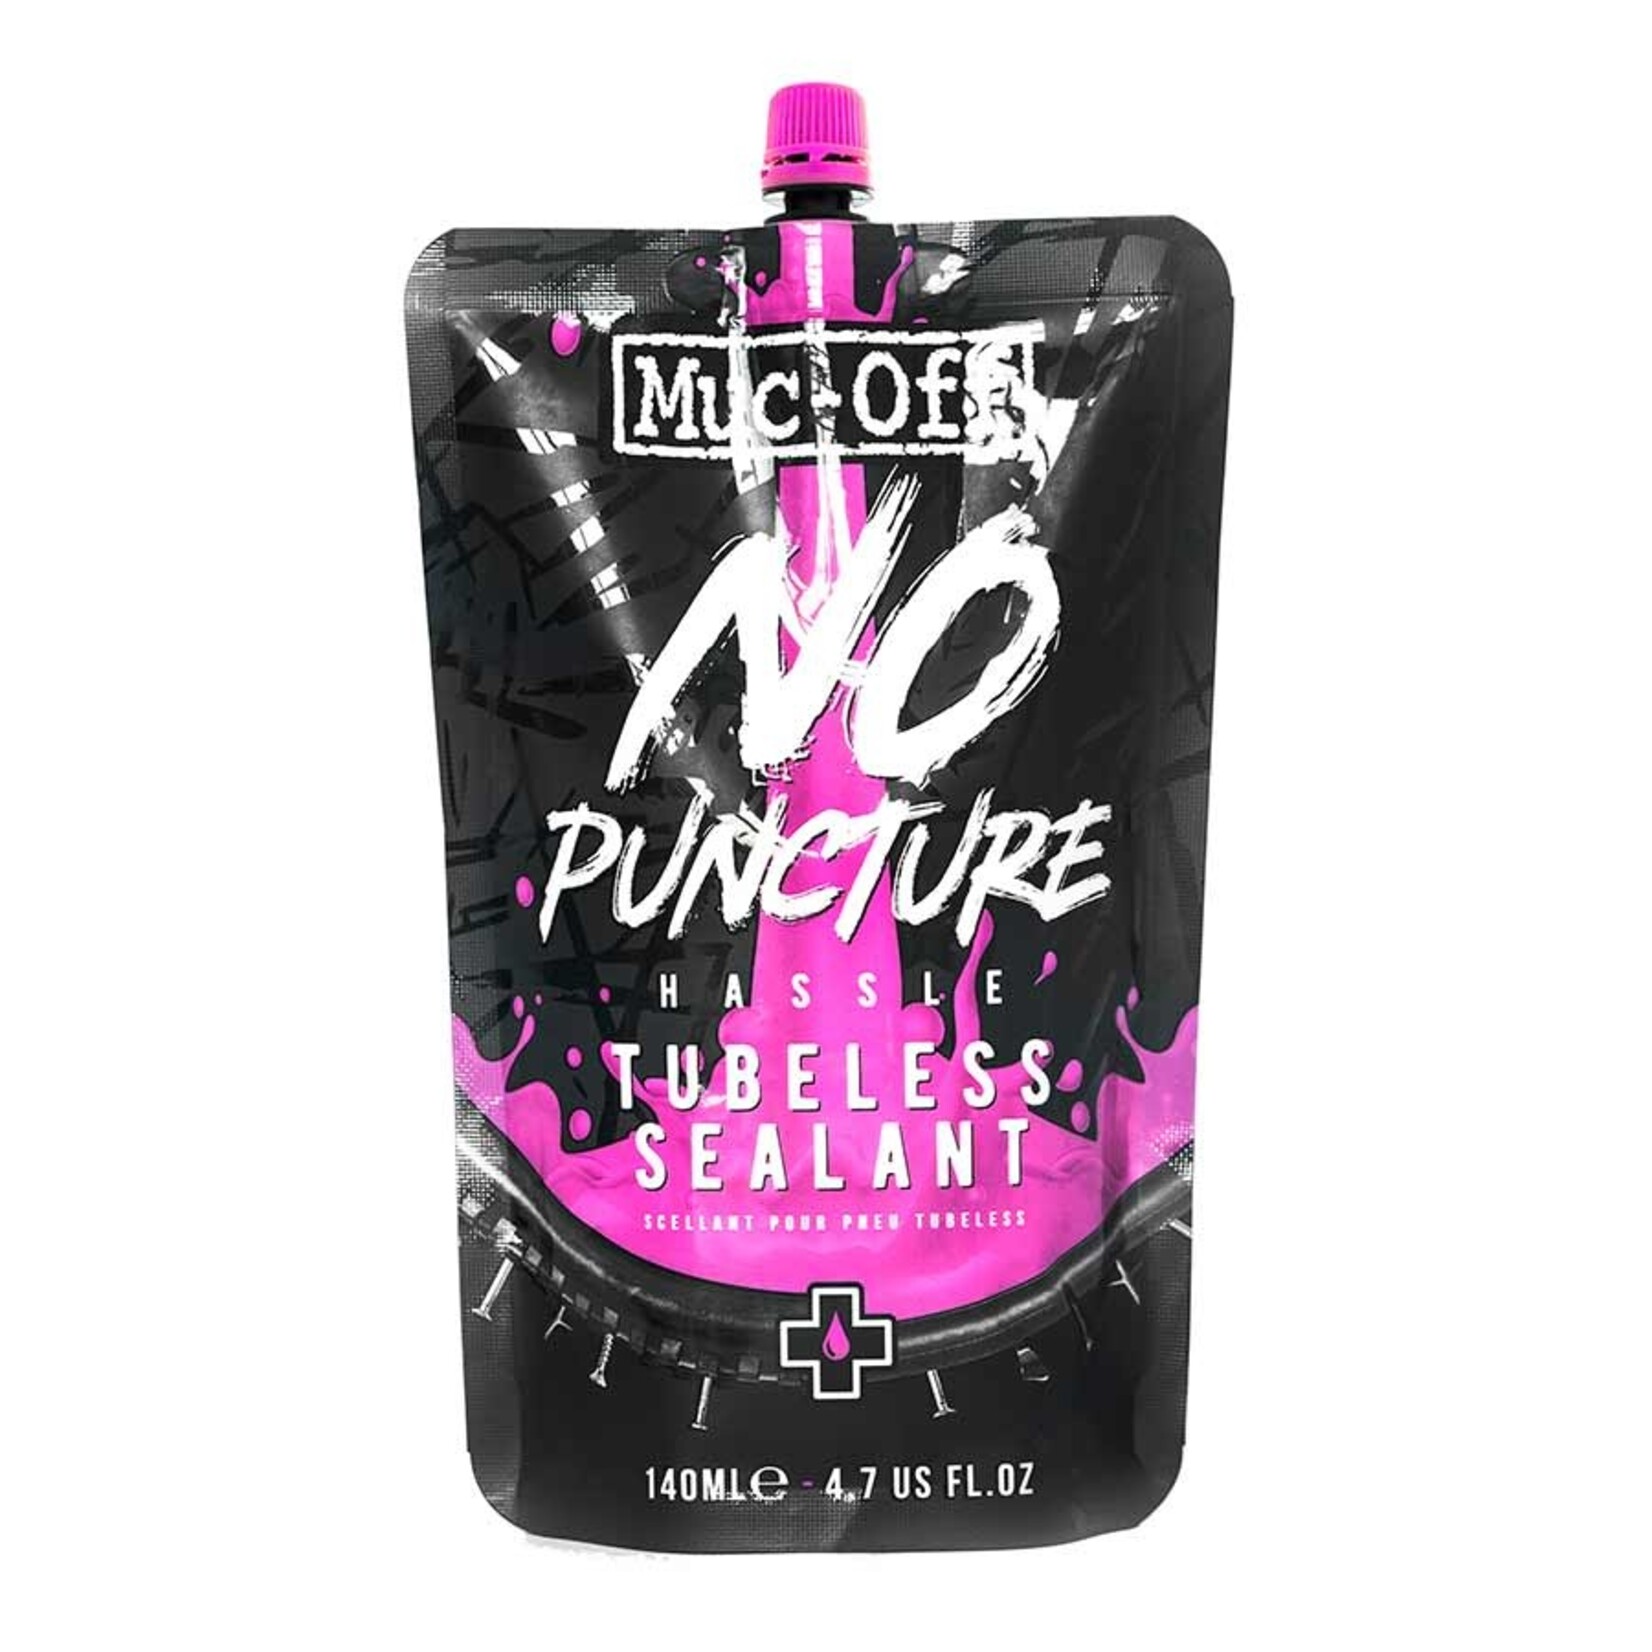 Muc-Off Muc-Off, Scellant tubeless No Puncture